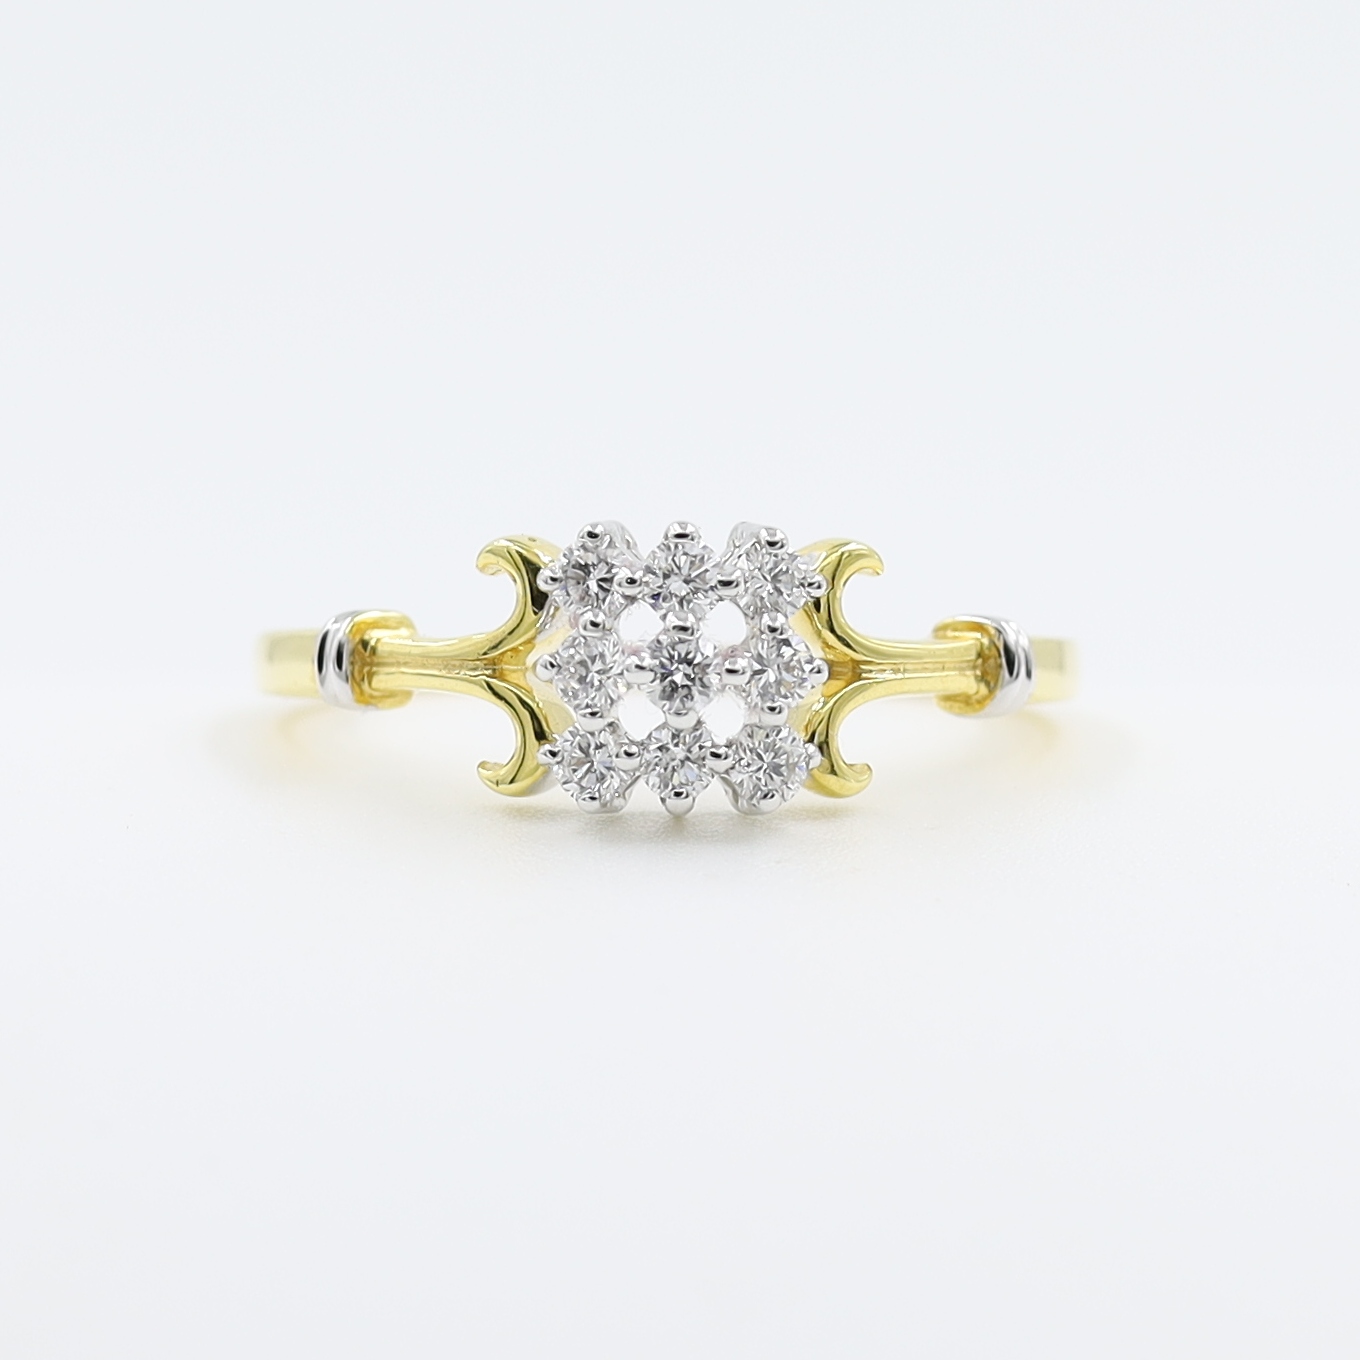 14kt Yellow Gold Delicate Natural Diamond Ring with some Rodiam Work